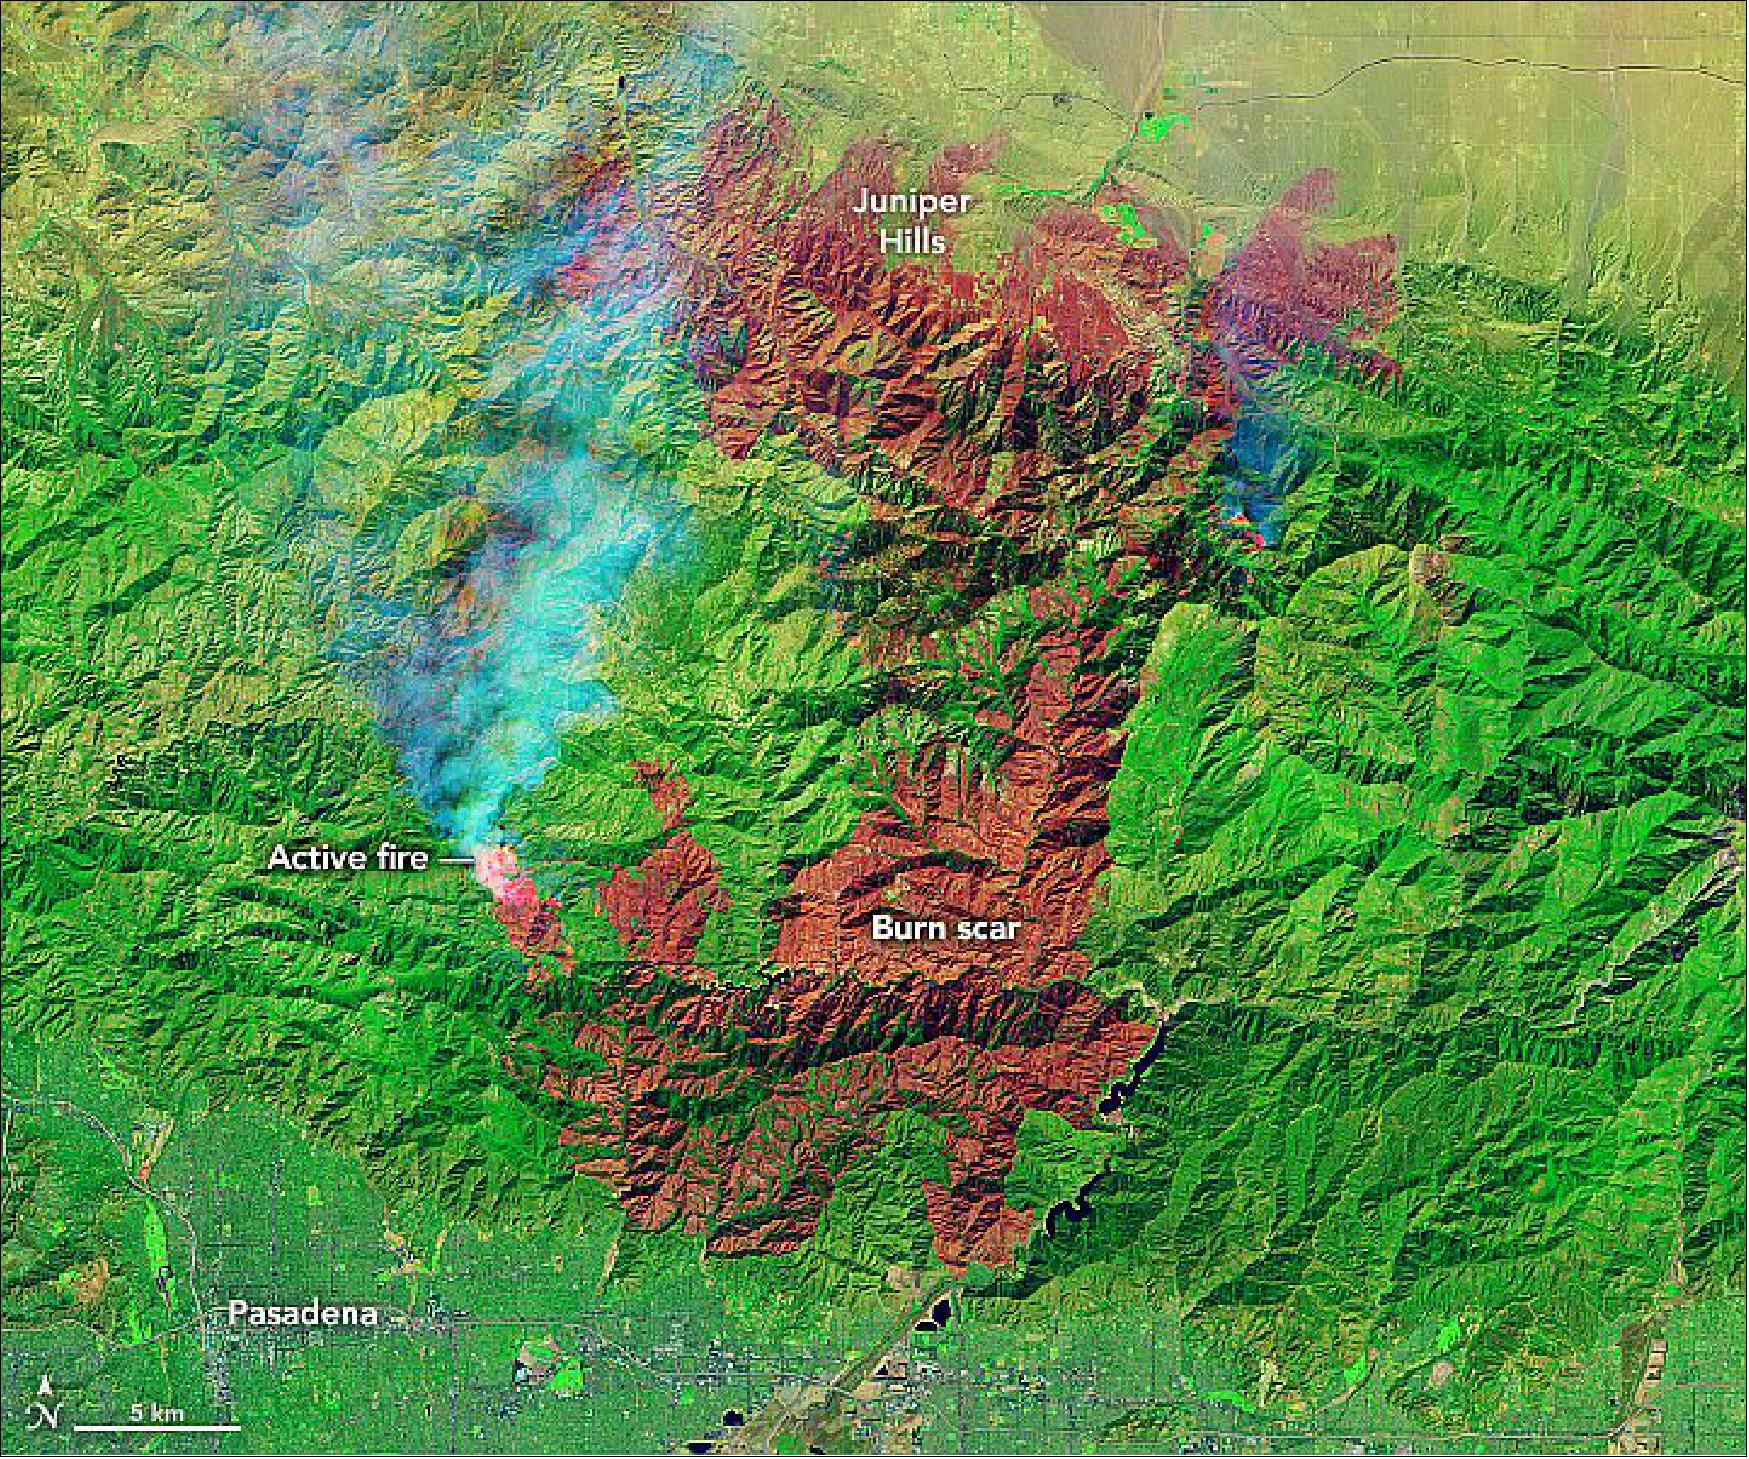 Figure 30: The fire is among the largest Los Angeles County has ever faced. Stavros and other NASA fire experts have been monitoring the blazes using a suite of satellite sensors. One of them, the OLI instrument on the Landsat-8 satellite, acquired an image of the burn scar on September 21, 2020, while the fire was still raging in Angeles National Forest. False color makes it easier to distinguish the burn scar. The image combines shortwave infrared, near-infrared, and green light (OLI bands 7-5-2) to show active fires (bright red), scarred land that has been consumed by the fire (darker red), intact vegetation (green), and cities and infrastructure (gray) [image credit: NASA Earth Observatory image by Lauren Dauphin, using Landsat data from the U.S. Geological Survey. AVIRIS photograph by Tim Williams on 21 September 2020 (NASA Armstrong Flight Research Center). Story by Adam Voiland]